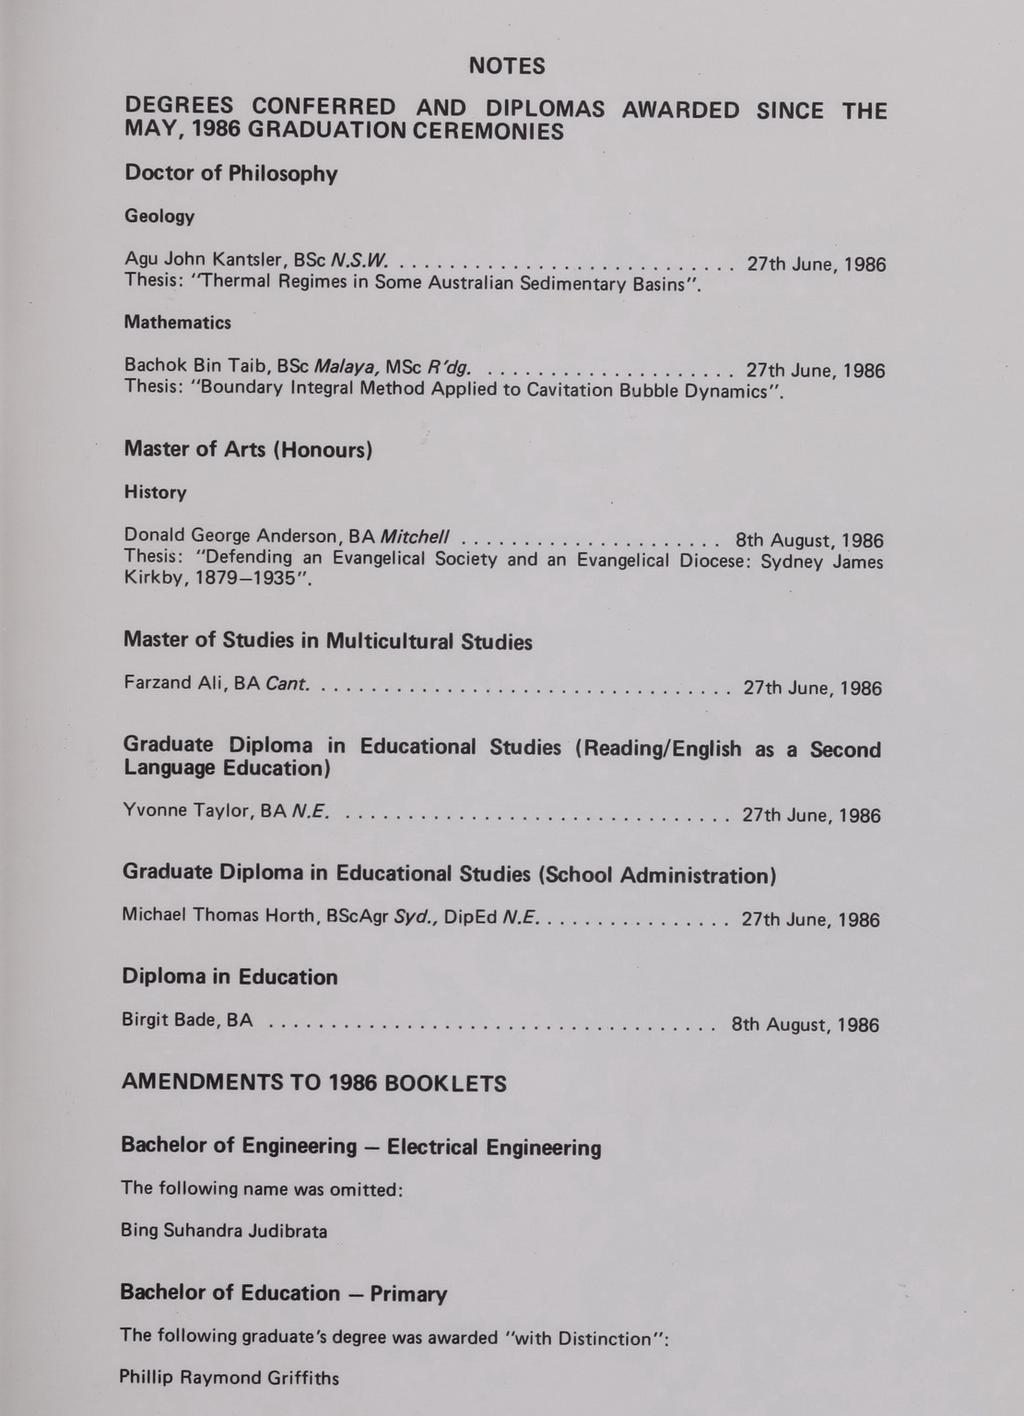 NOTES OEGREES CONFER REO AND DIPLOMAS AWARDED SINCE THE MAY, 1986 GRADUATION CEREMONIES Doctor of Philosophy Geology Agu John Kantsler, BSc N.S.W.... 27th June, 1986 Thesis : "Thermal Regimes in Some Australian Sedimentary Basins", Mathematics Bachok Bin Taib.